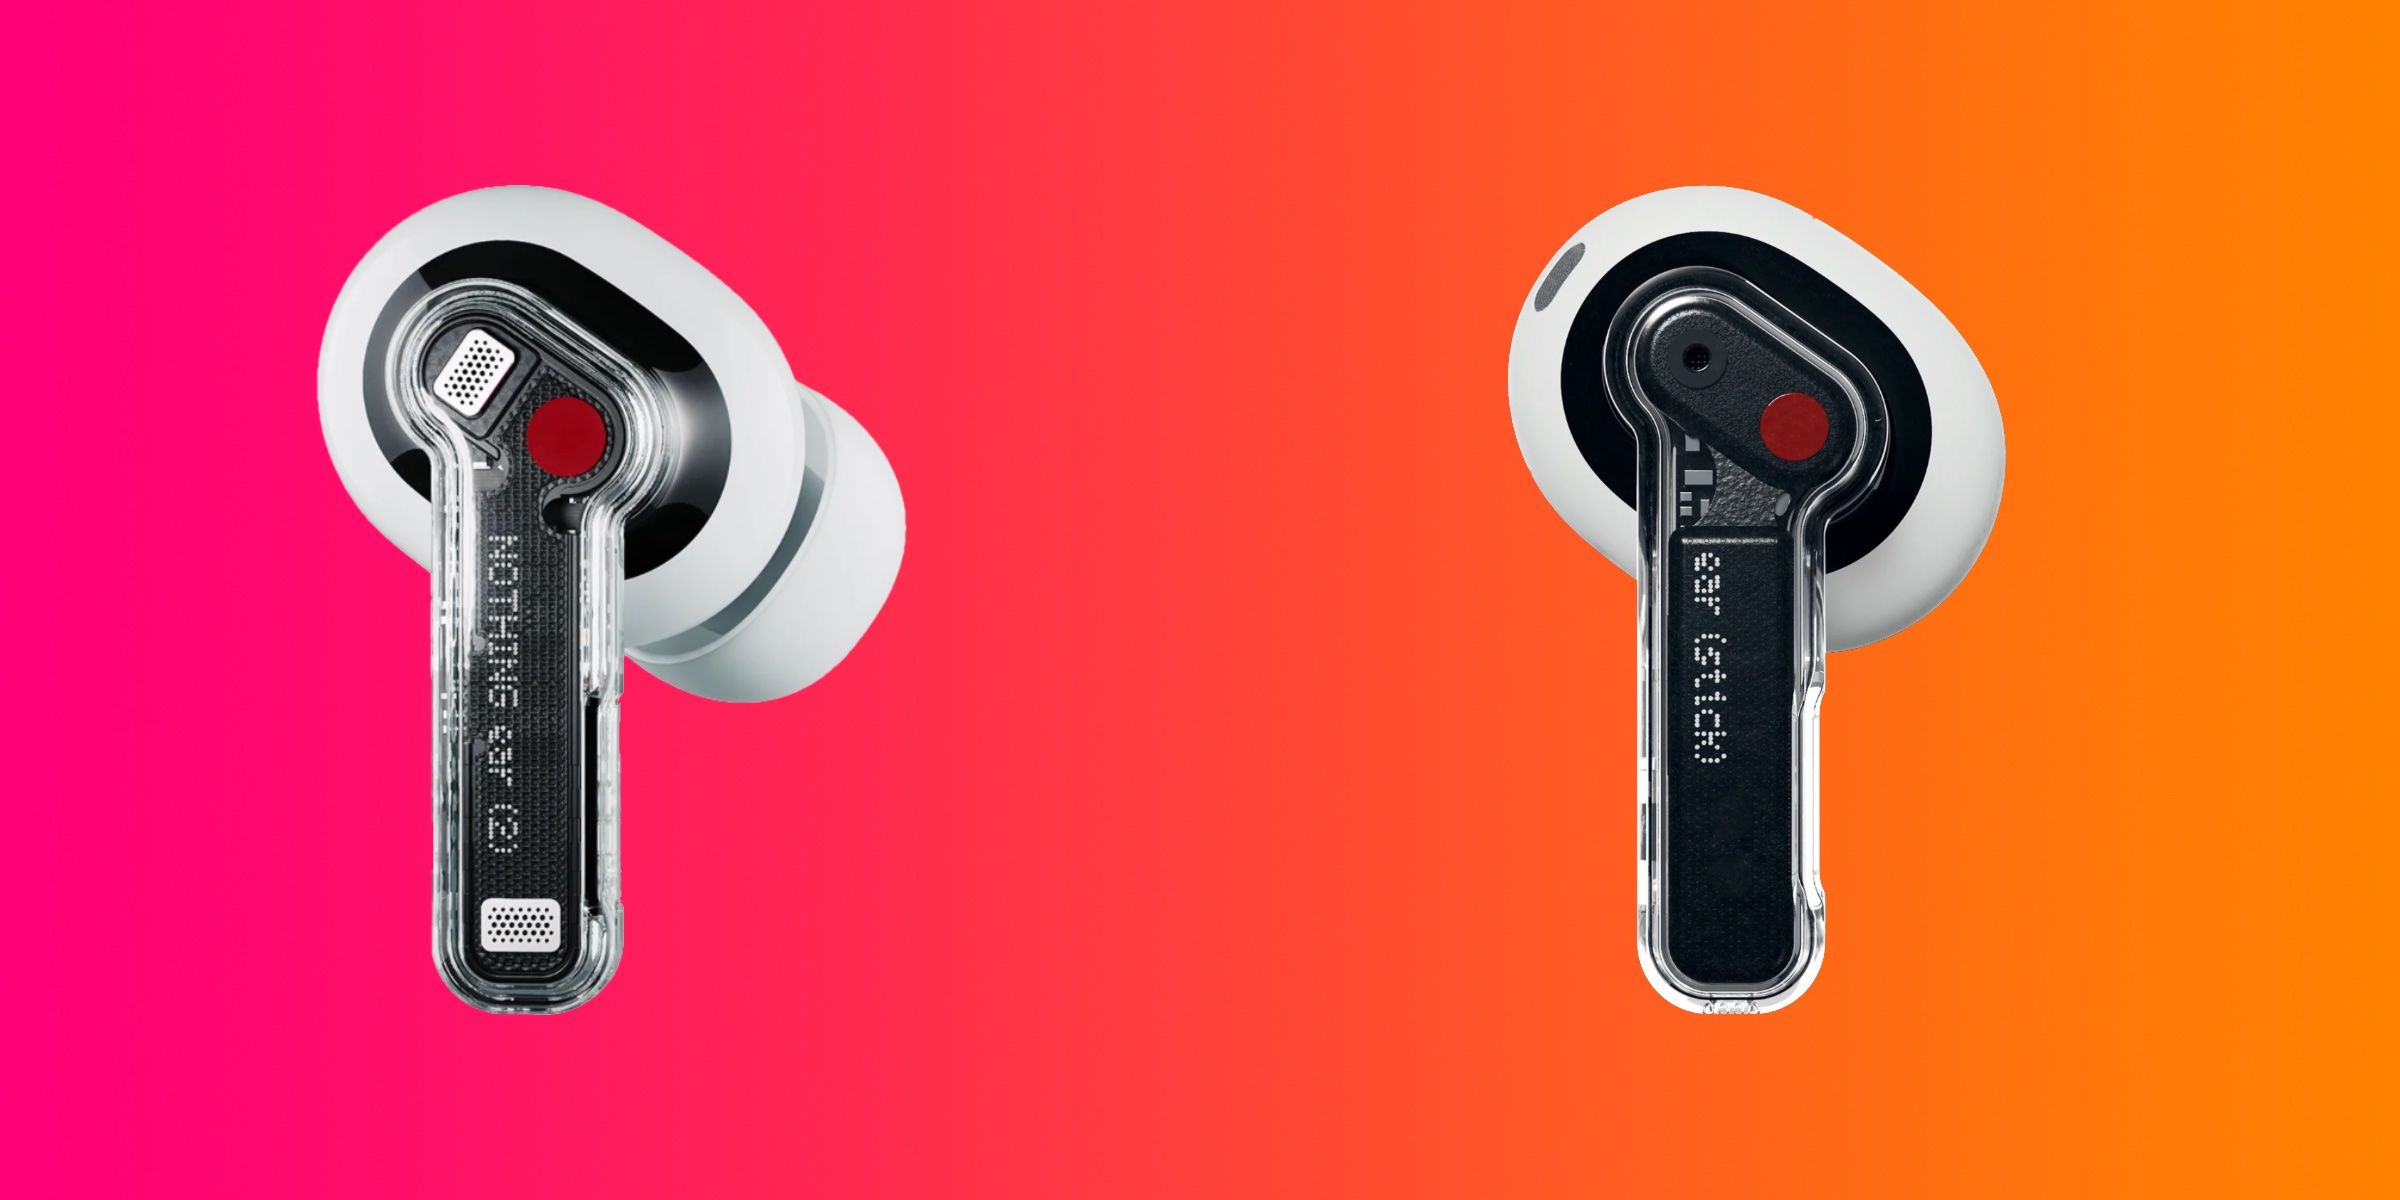 Nothing Ear (2) Vs Nothing Ear (Stick): Which Earbuds Should You Opt For?